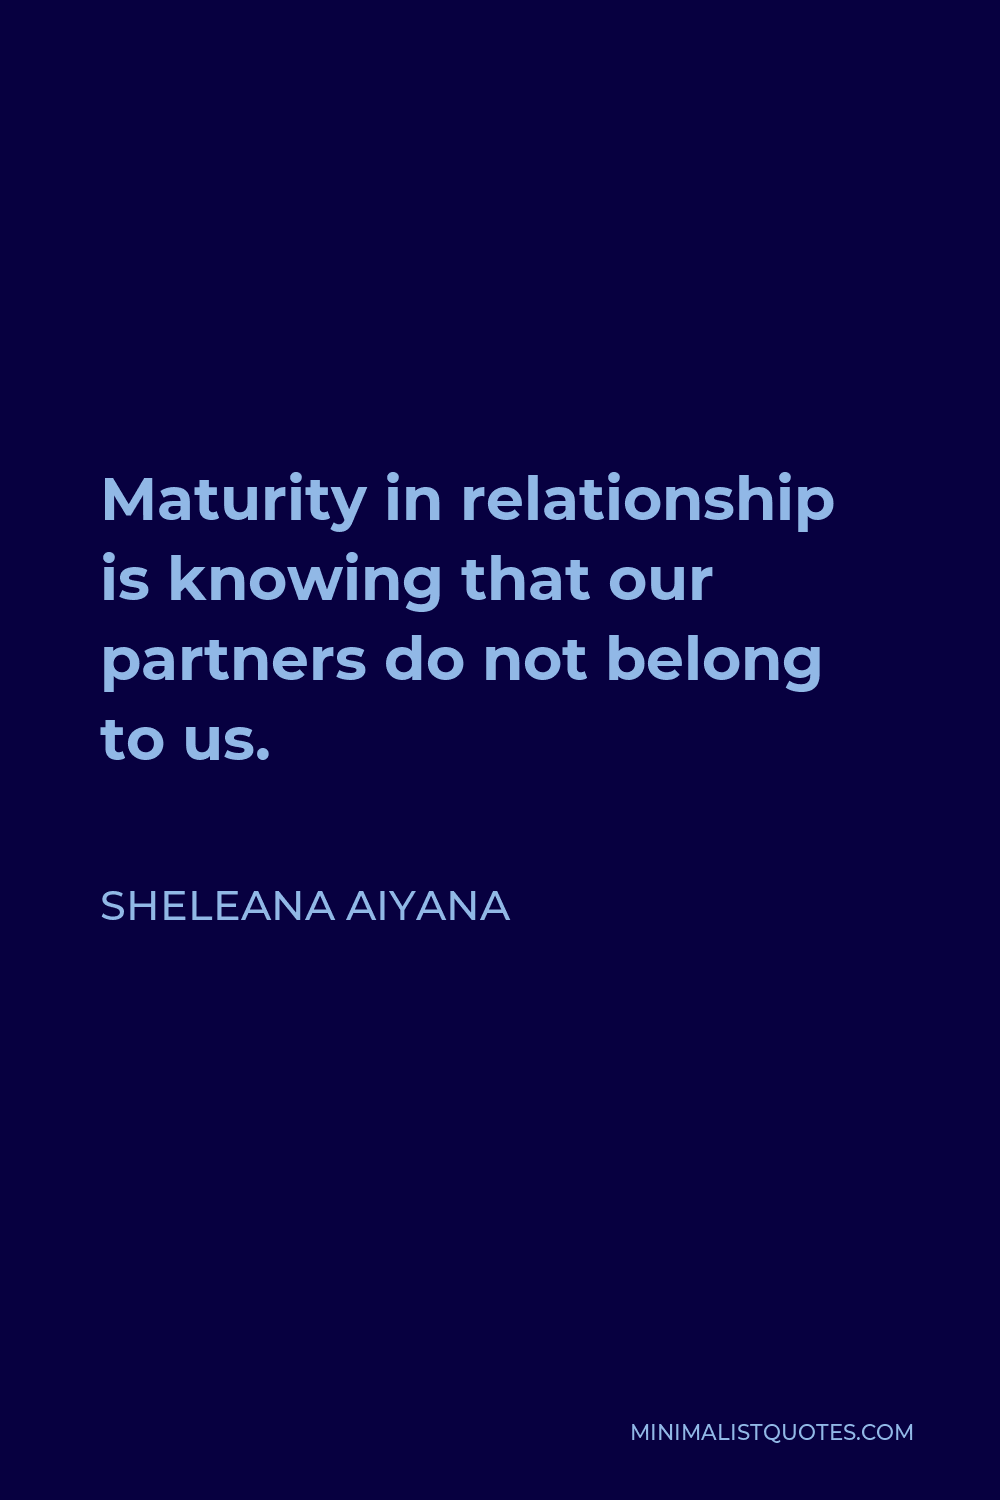 Sheleana Aiyana Quote - Maturity in relationship is knowing that our partners do not belong to us.